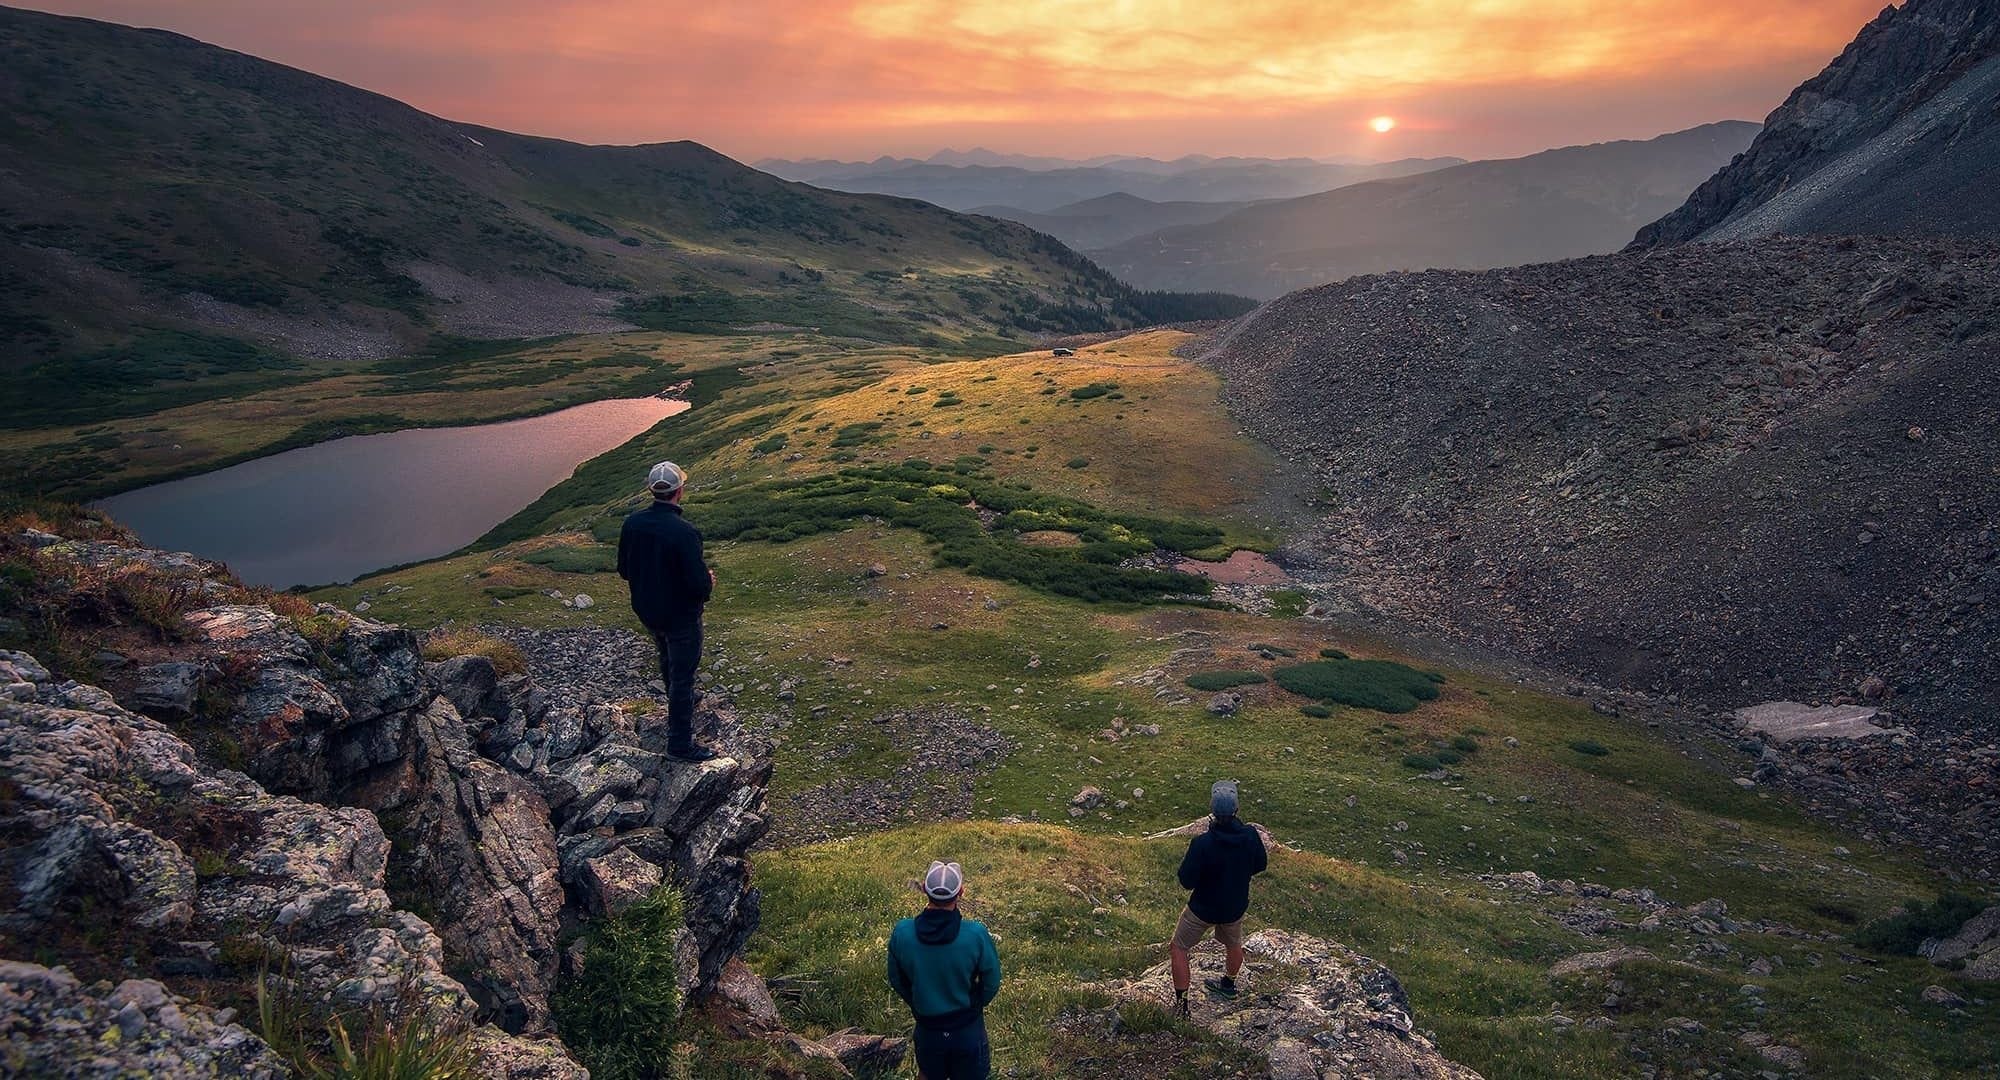 Three guys watch a sunset in the mountains while hiking